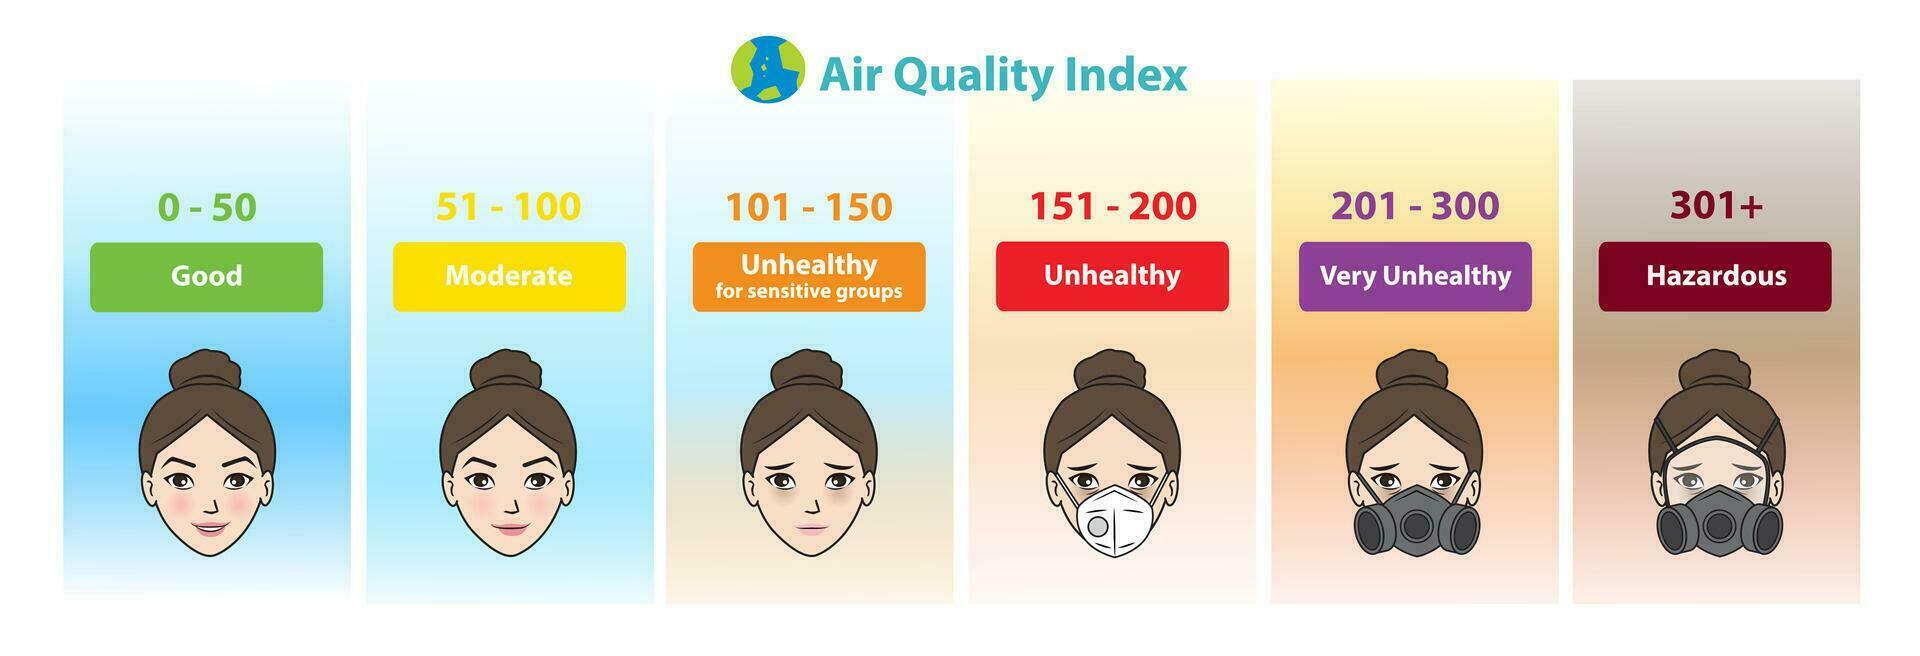 Air Quality Index scale and color legend vector isolated on white background. AQI for cautionary statement for PM2.5 with cute cartoon character icon set illustration.